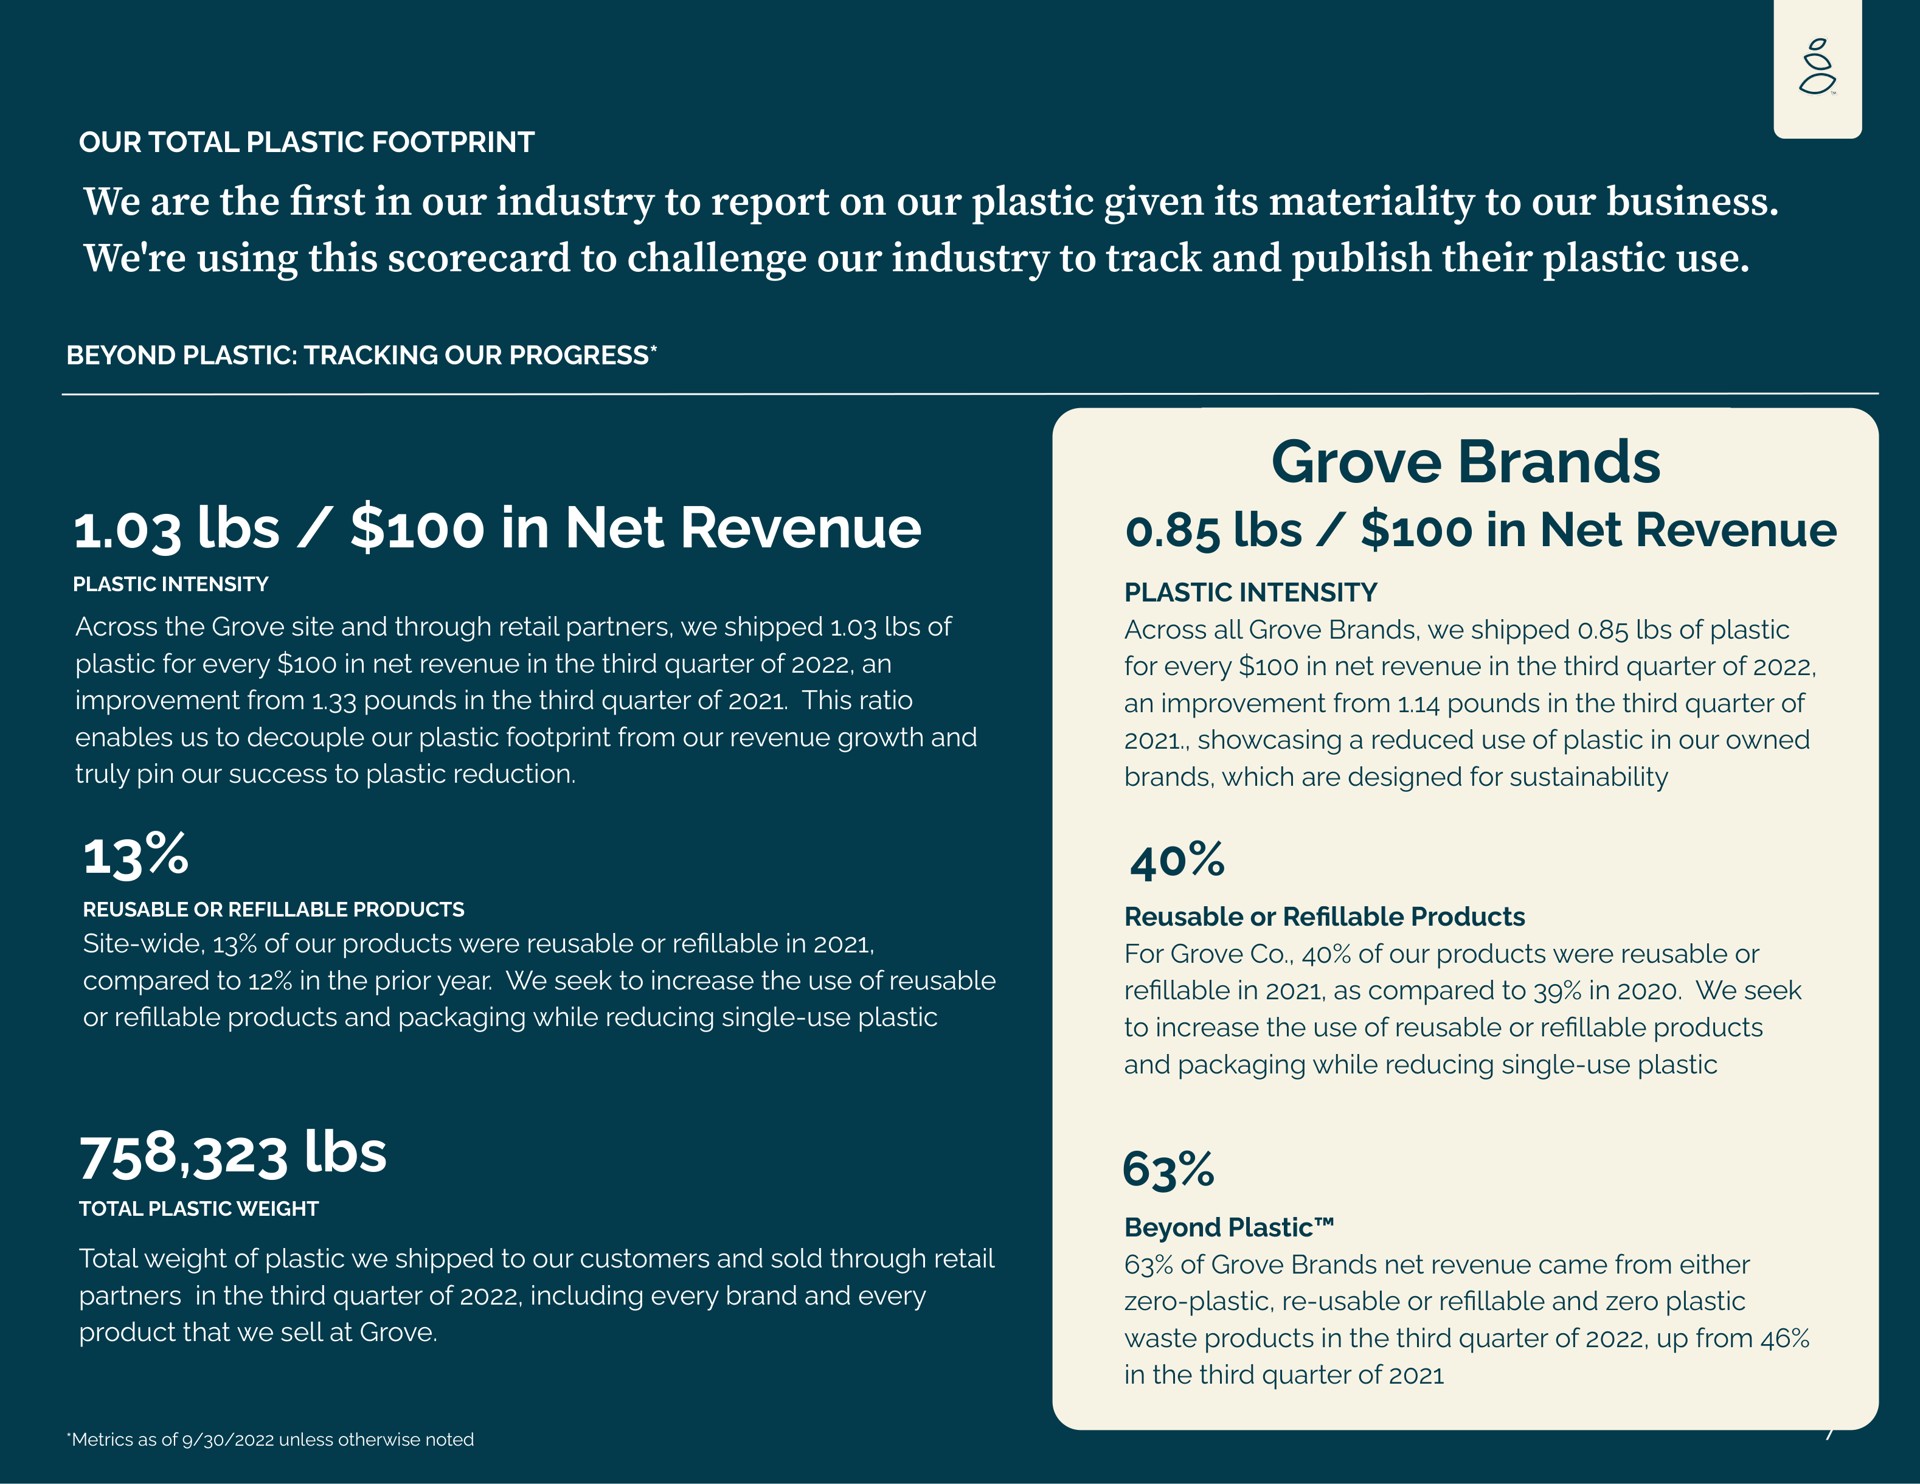 we are the in our industry to report on our plastic given its materiality to our business we using this to challenge our industry to track and publish their plastic use in net revenue grove brands in net revenue first | Grove